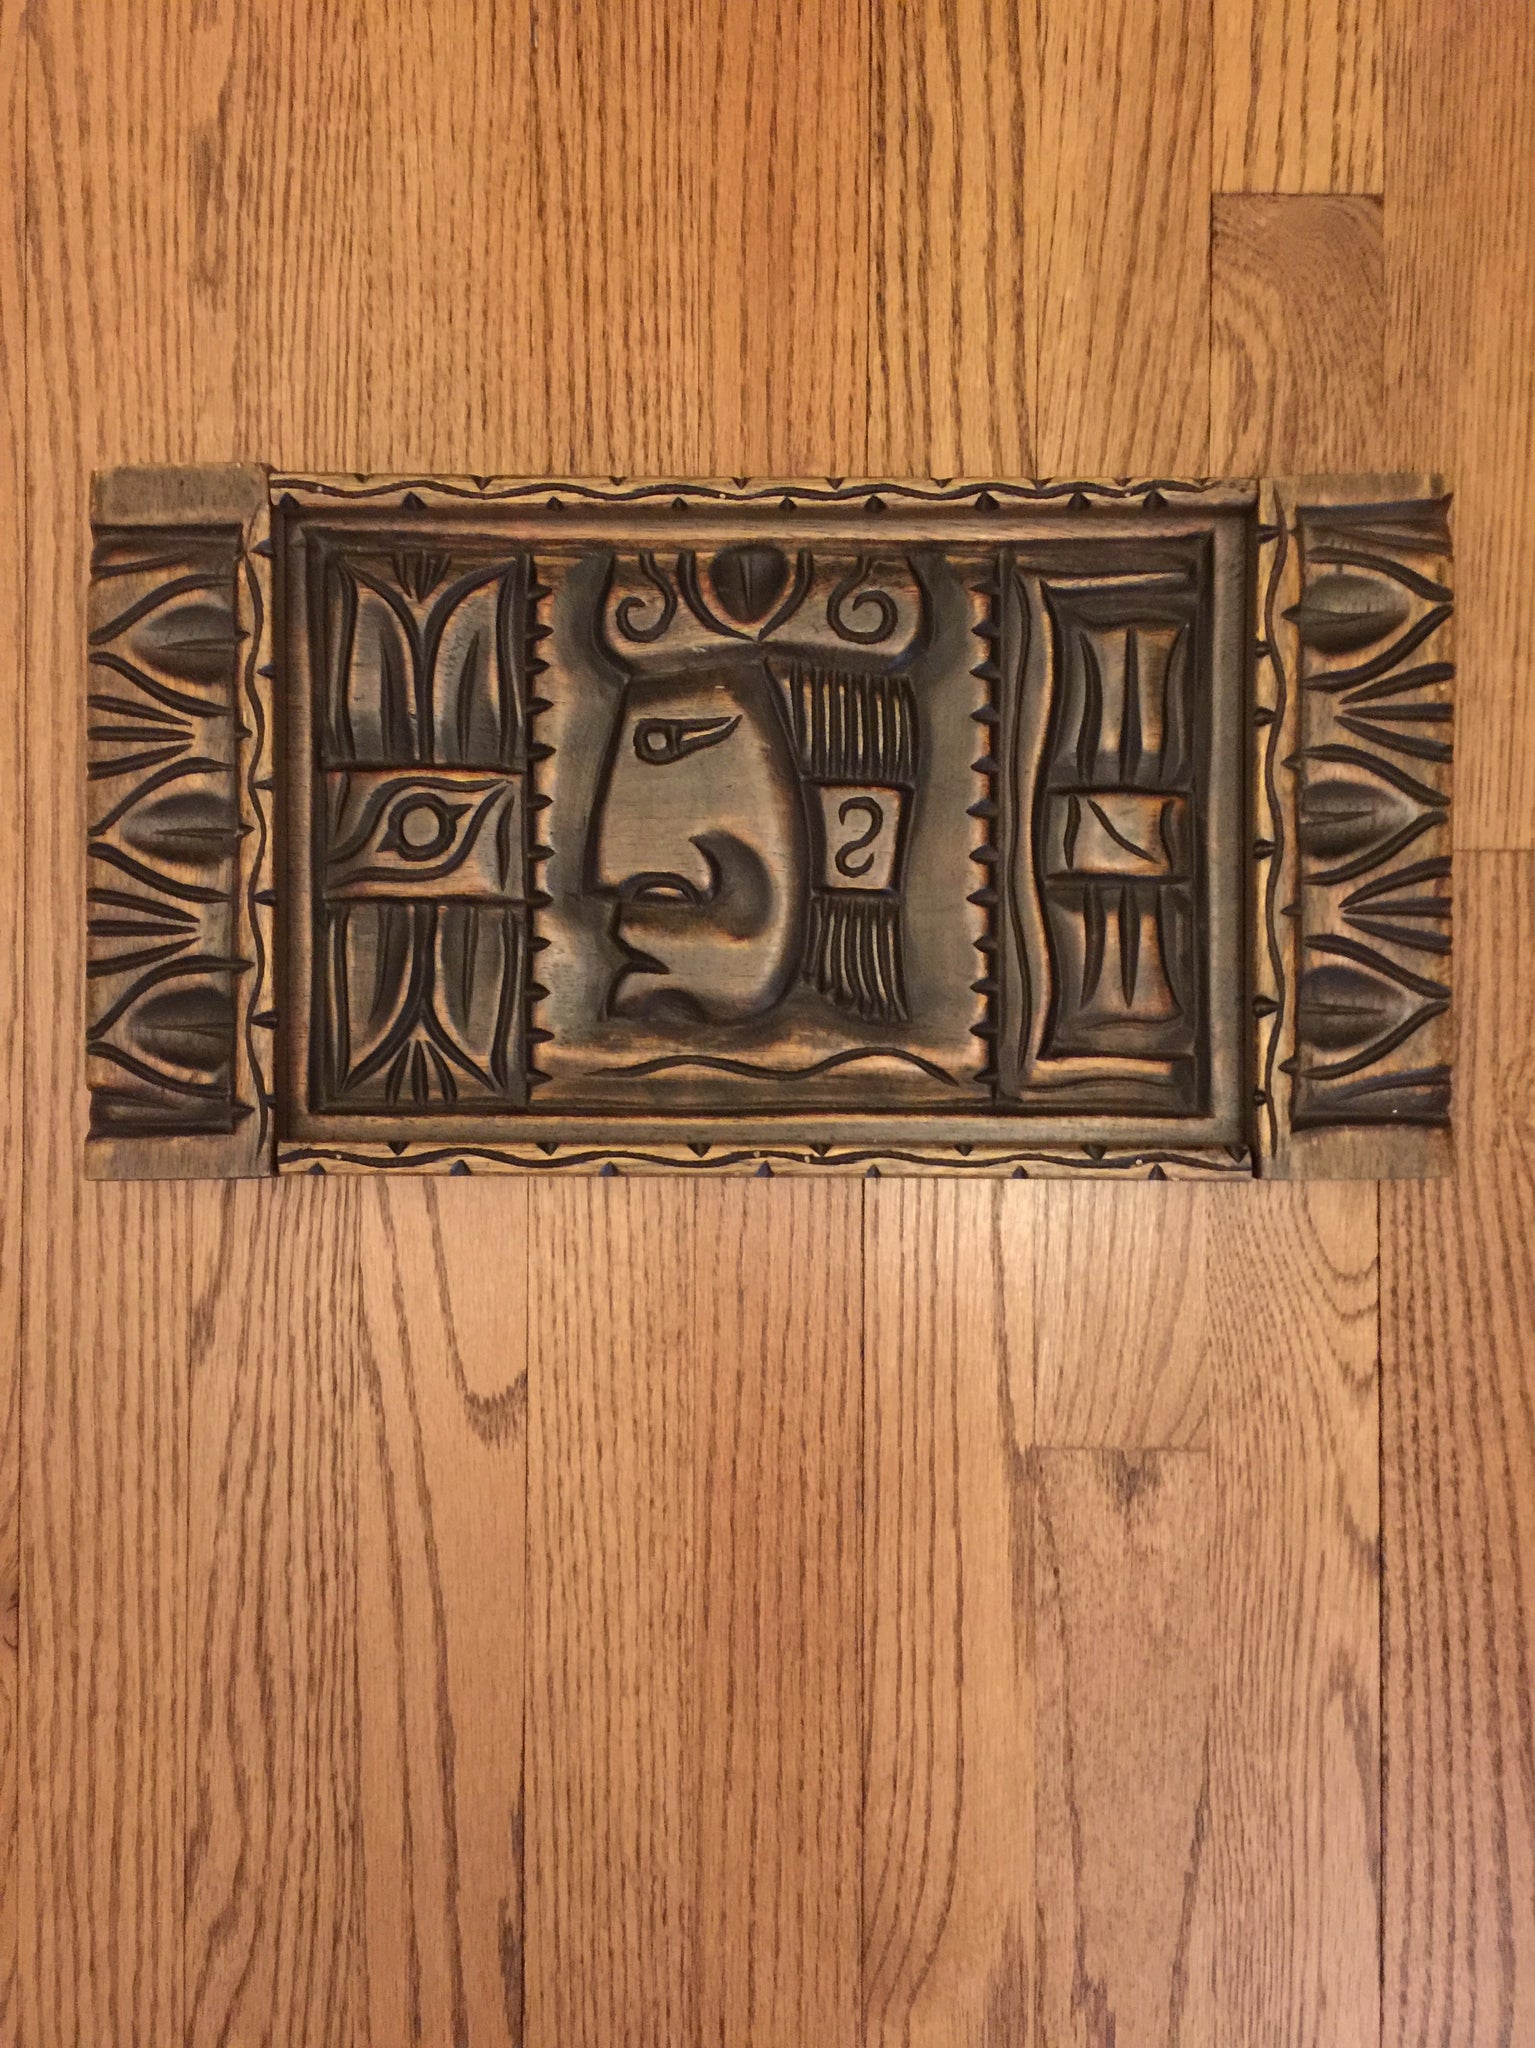 Mayan Maize God Hand Carved Wooden Art Panel Ipad Lap Desk Size